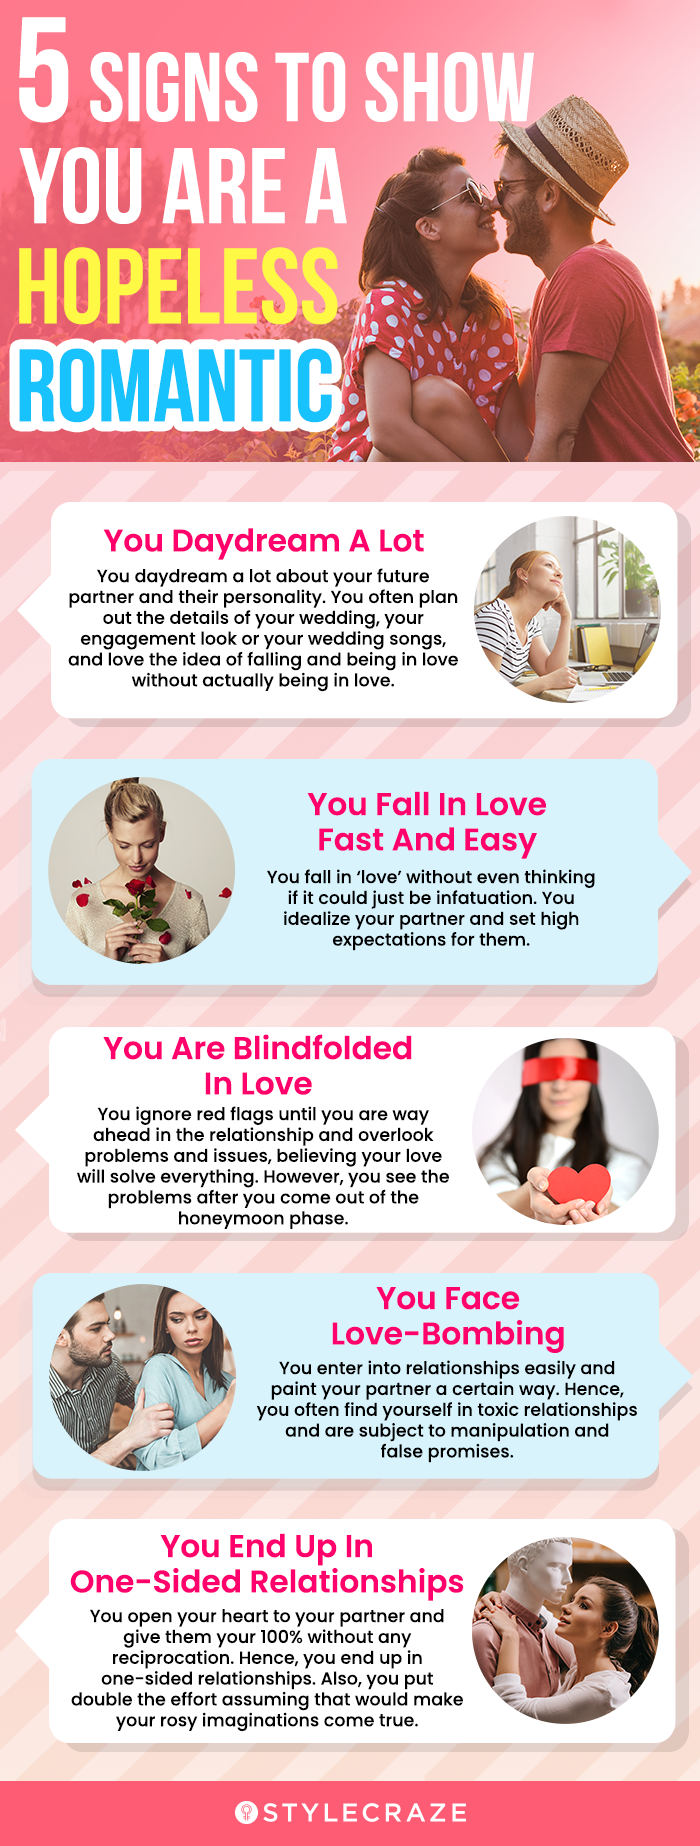 5 signs to show you are a hopeless romantic (infographic)